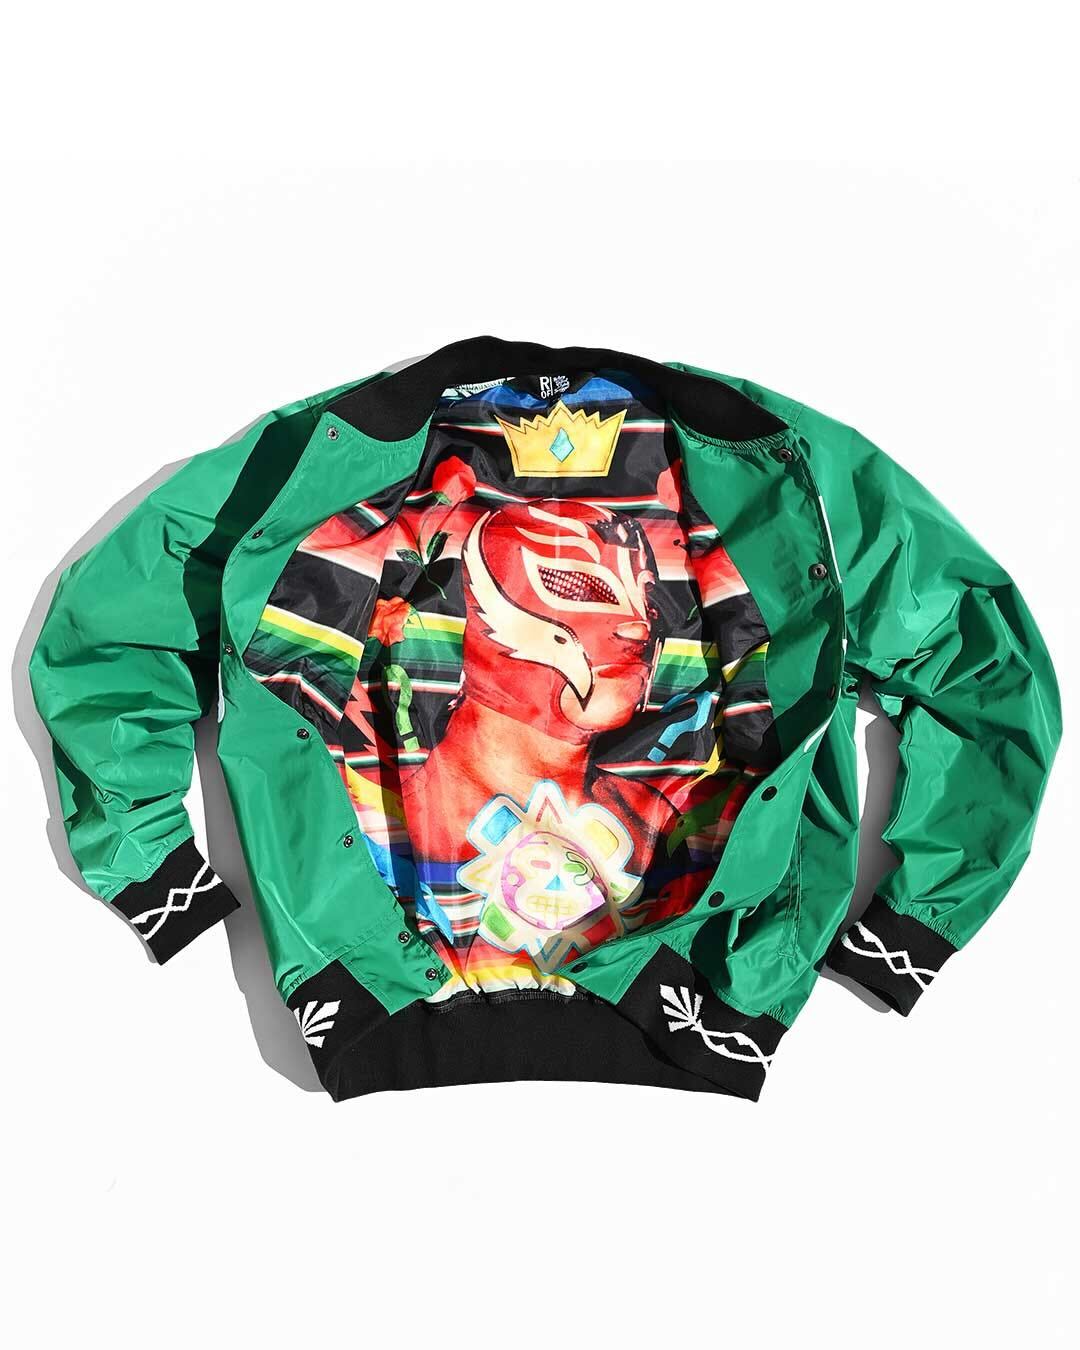 Rey Mysterio 619 Mexico Stadium Jacket - Roots of Fight